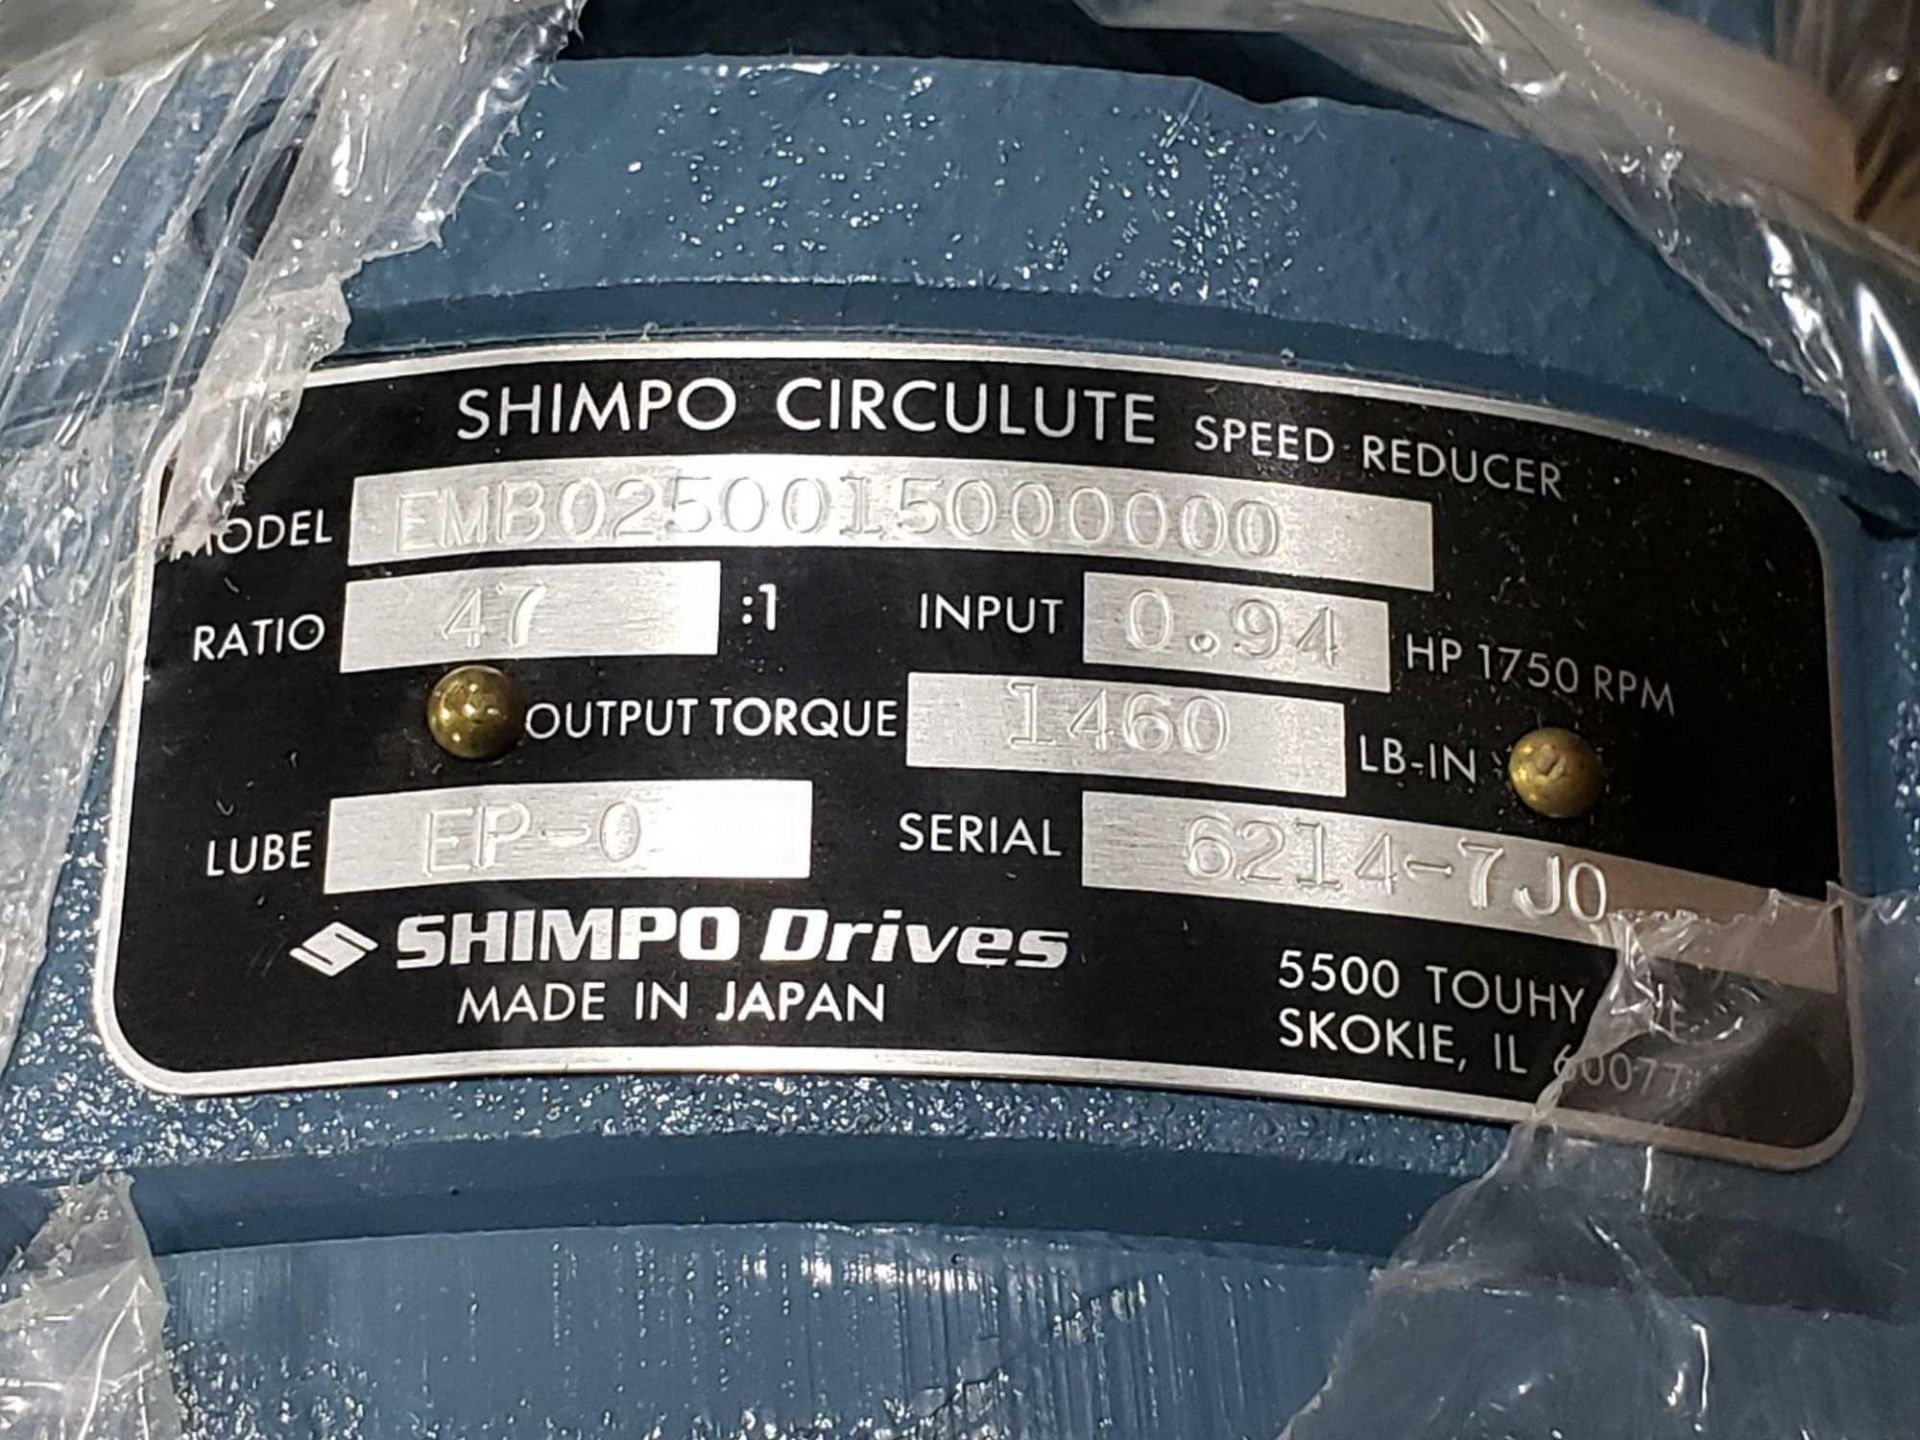 Shimpo Circulate gear speed reducer model EMB0250015000000, ratio 47:1. New in box. - Image 2 of 3